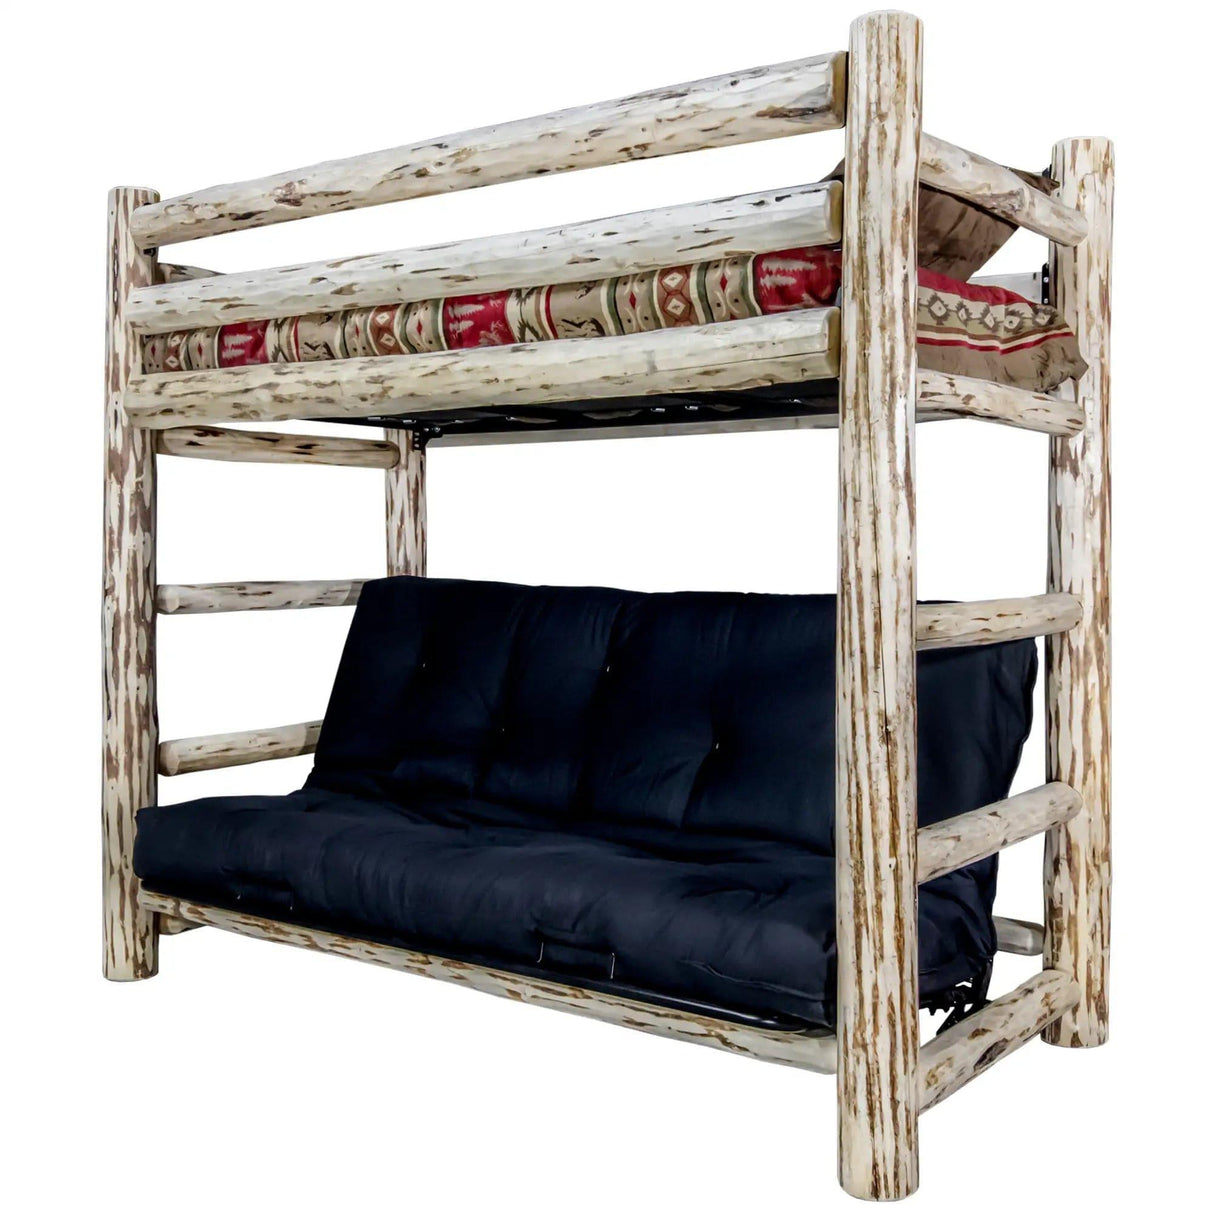 Montana Collection Twin Bunk Bed over Full Futon Frame w/ Mattress, Clear Lacquer Finish MWTWFMRV - Bedroom Depot USA